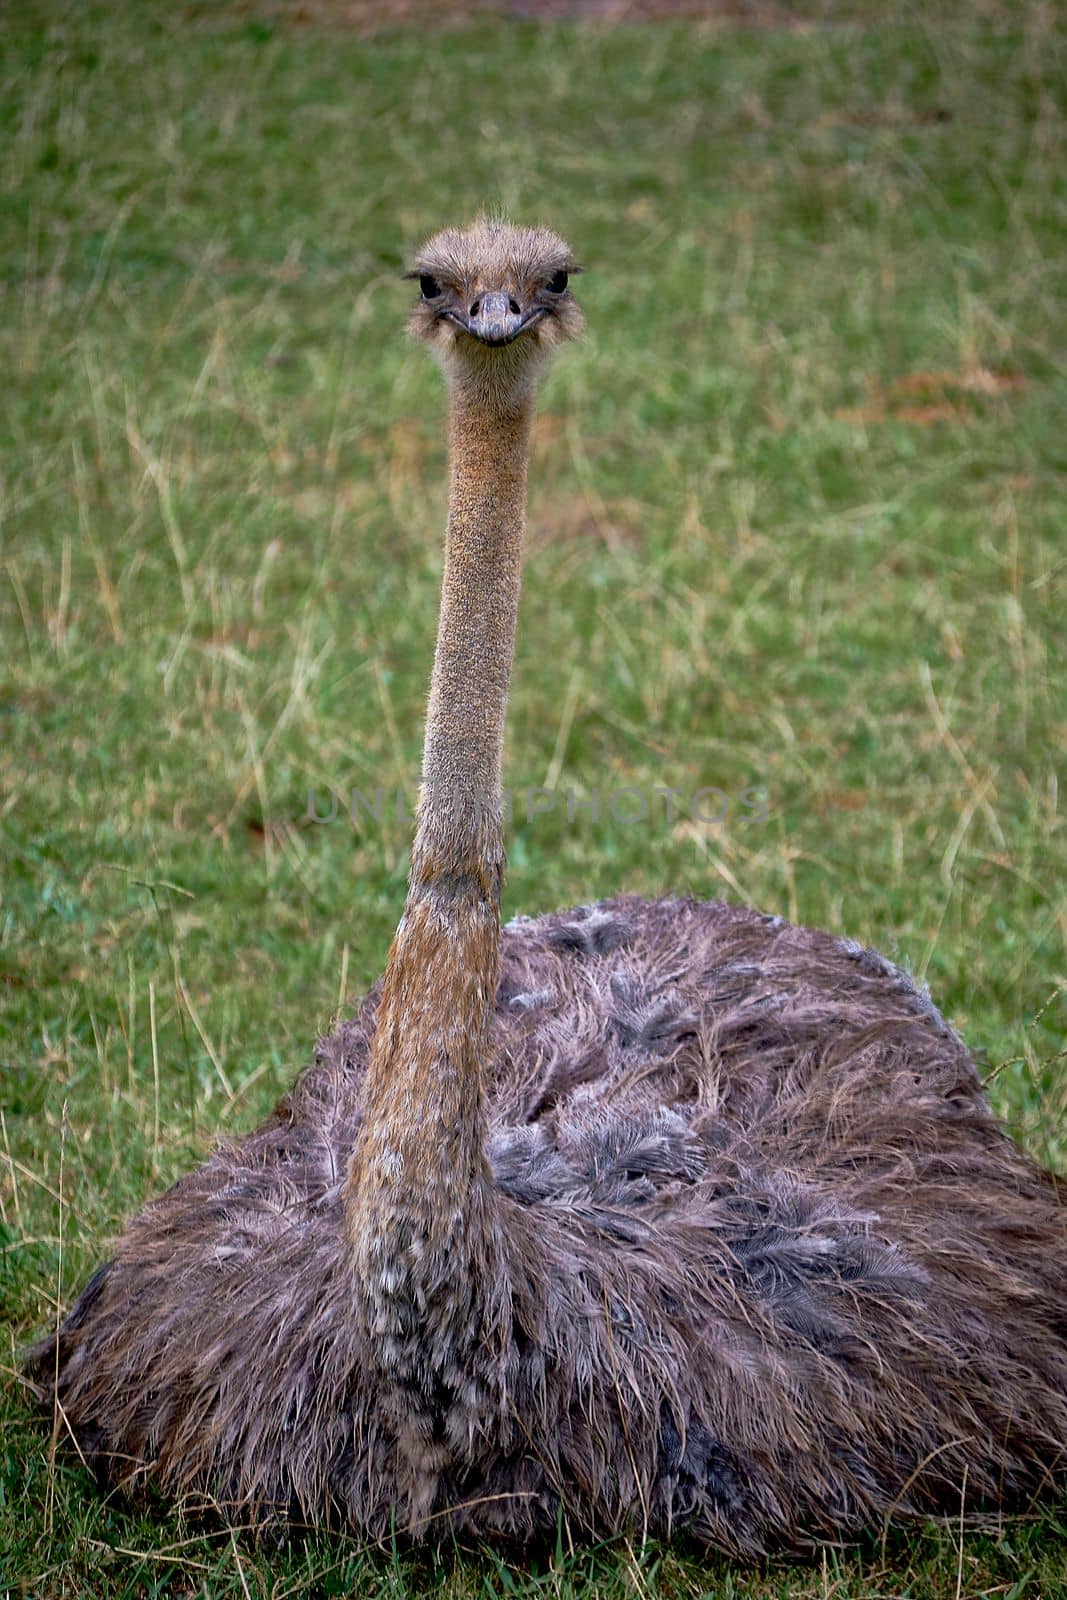 A solitary ostrich sitting in a meadow.Details , quietness, front view, grass, foliage, long neck beak